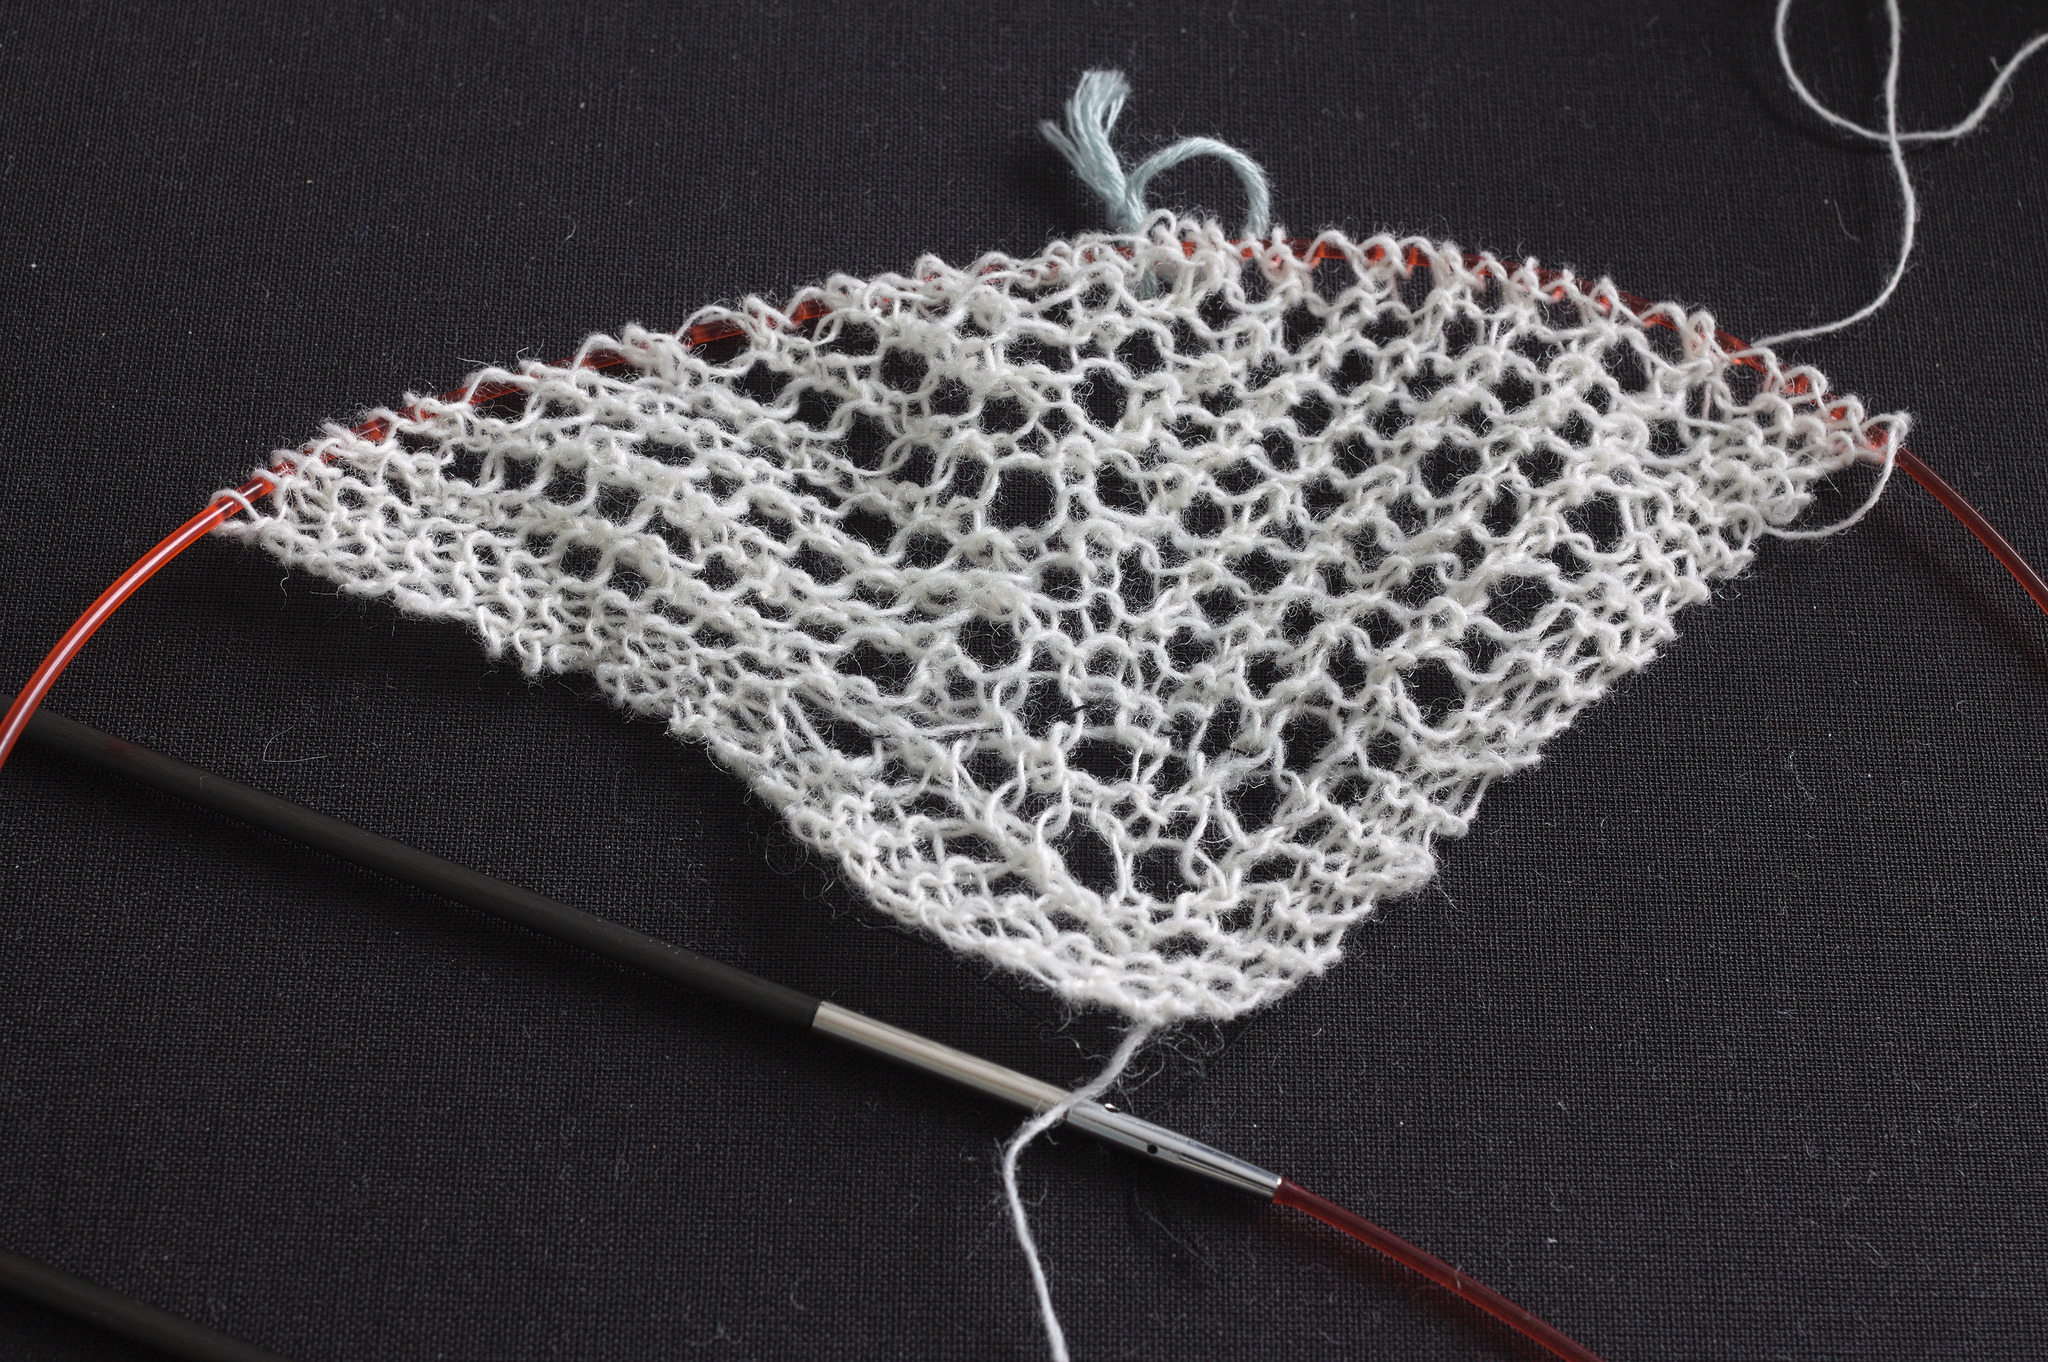 The beginning of a shawl in very thin white yarn, still on a circular needle with a stitch marker near the center stitch.